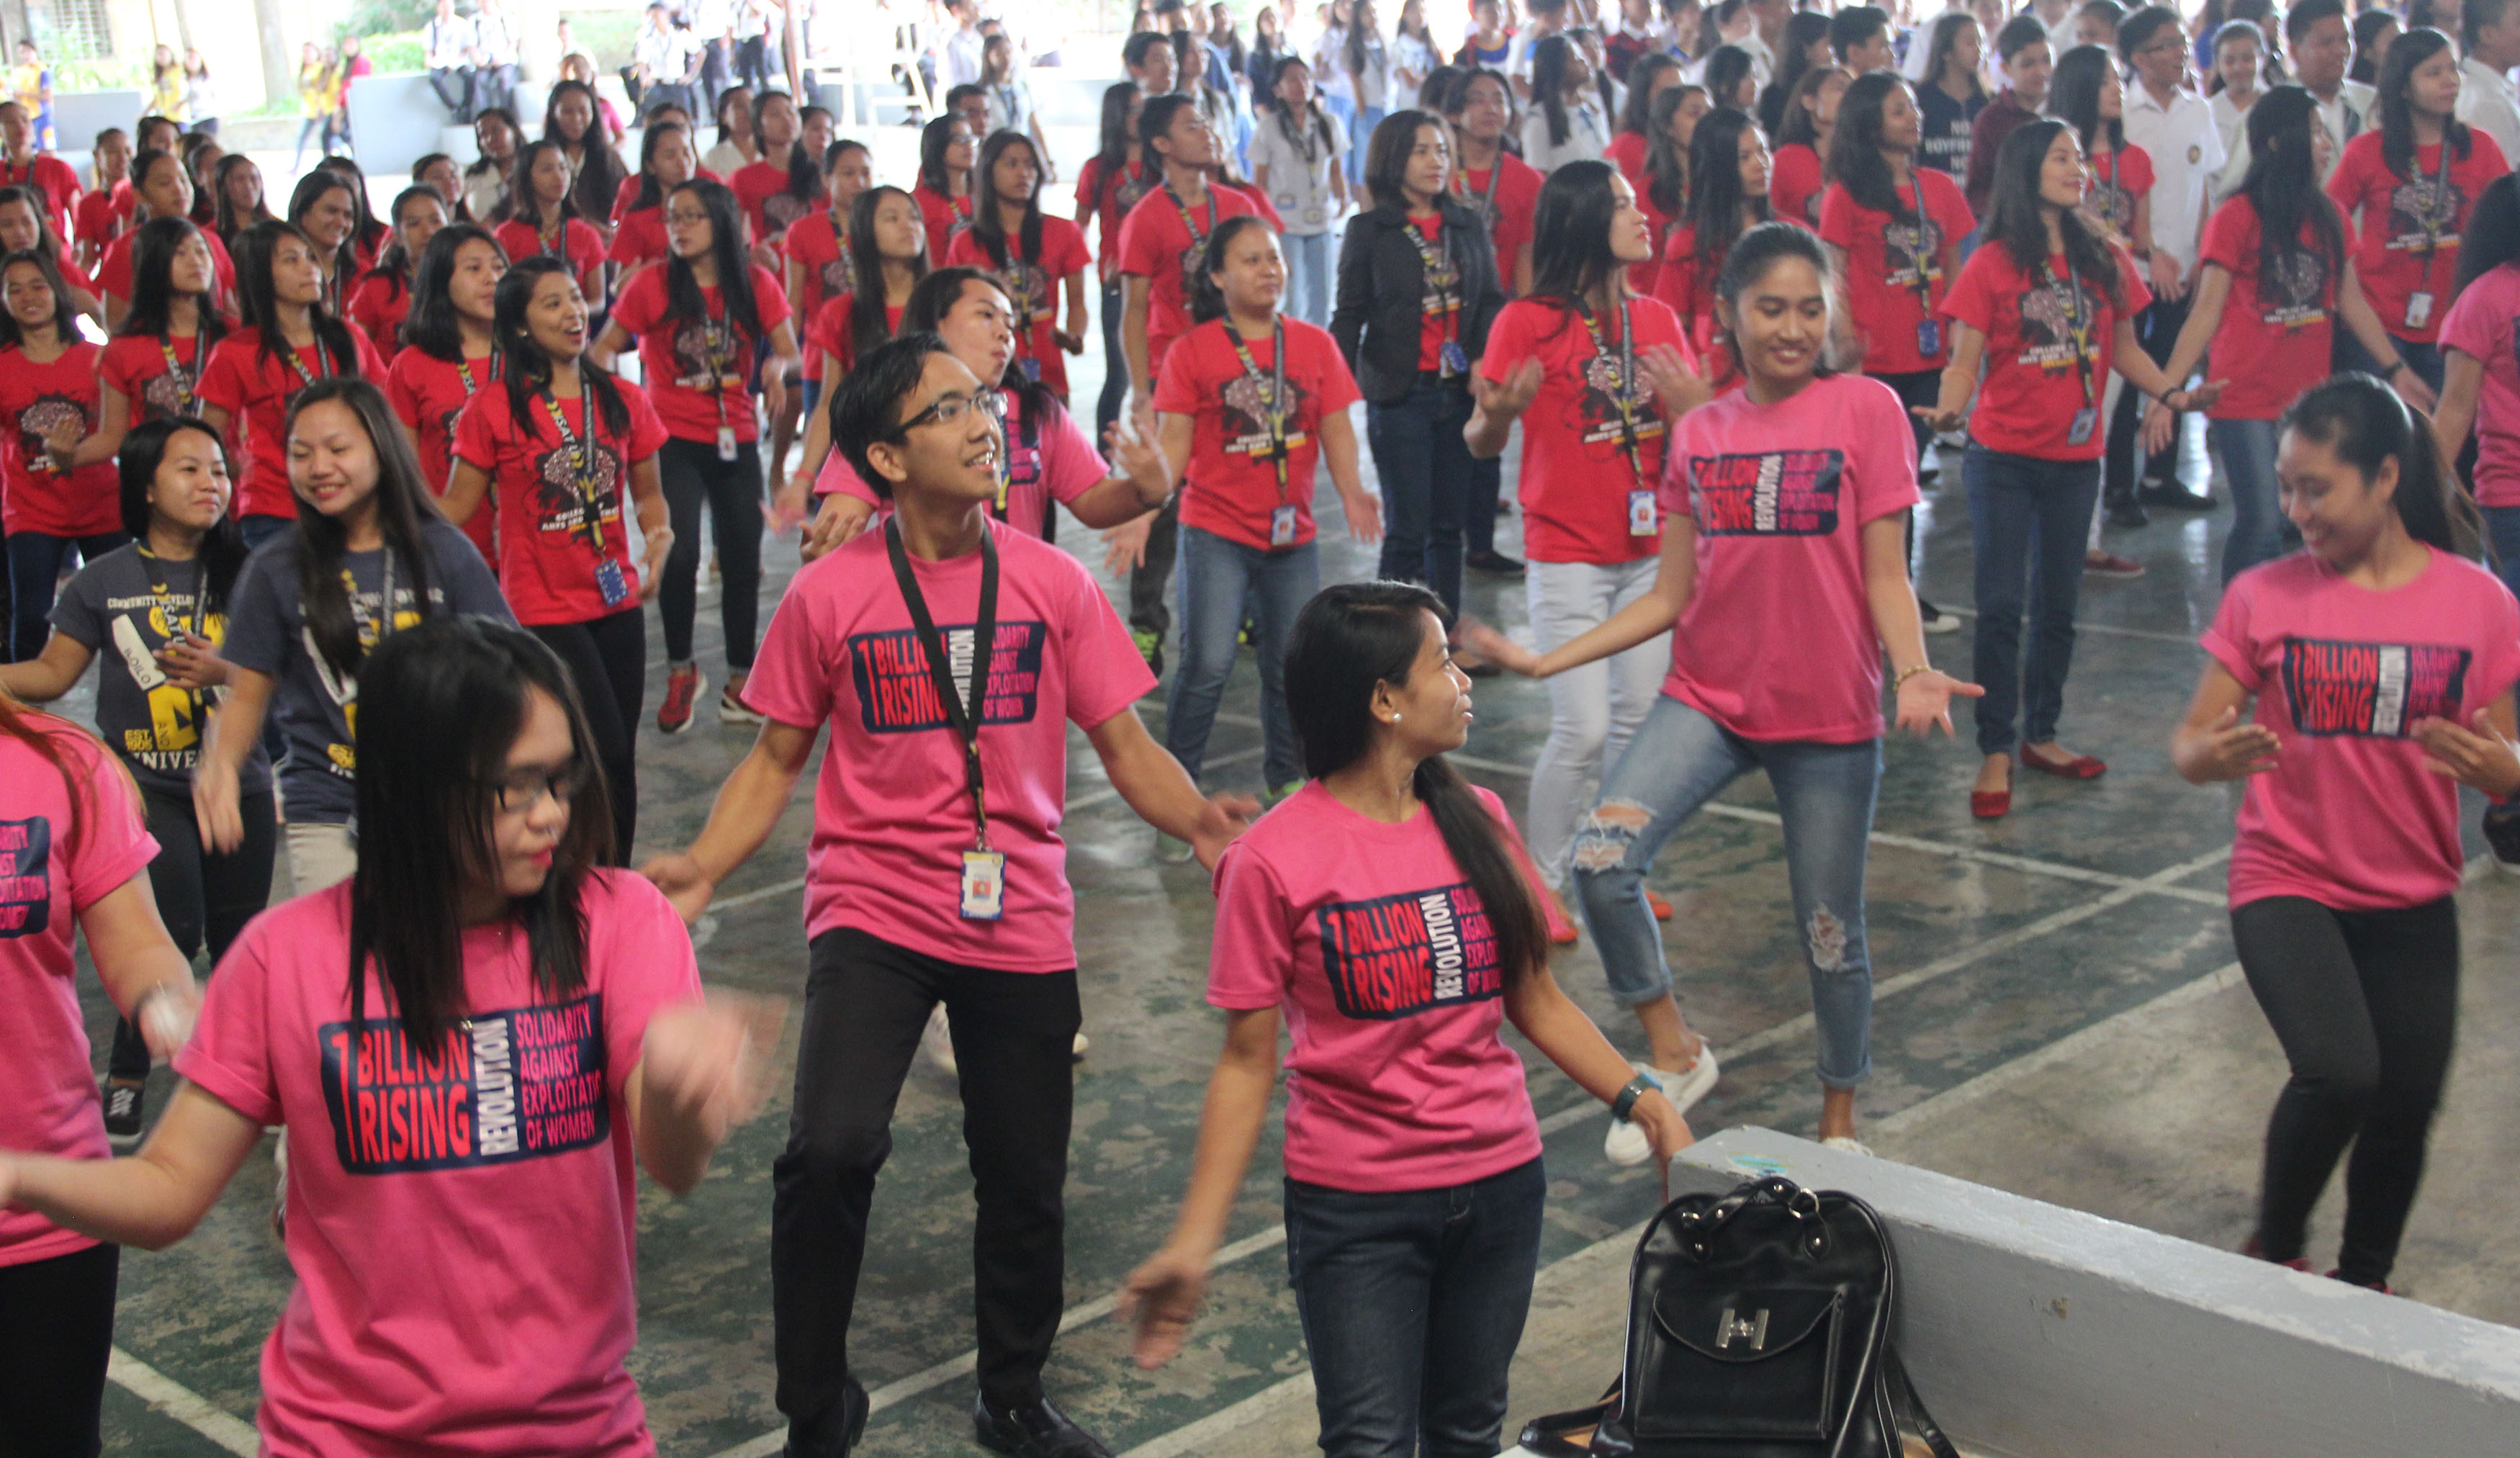 Dancing to the tune of "Isang Bilyon", the students join in 1 Billion Rising Revolution solidarity against exploitation of women.